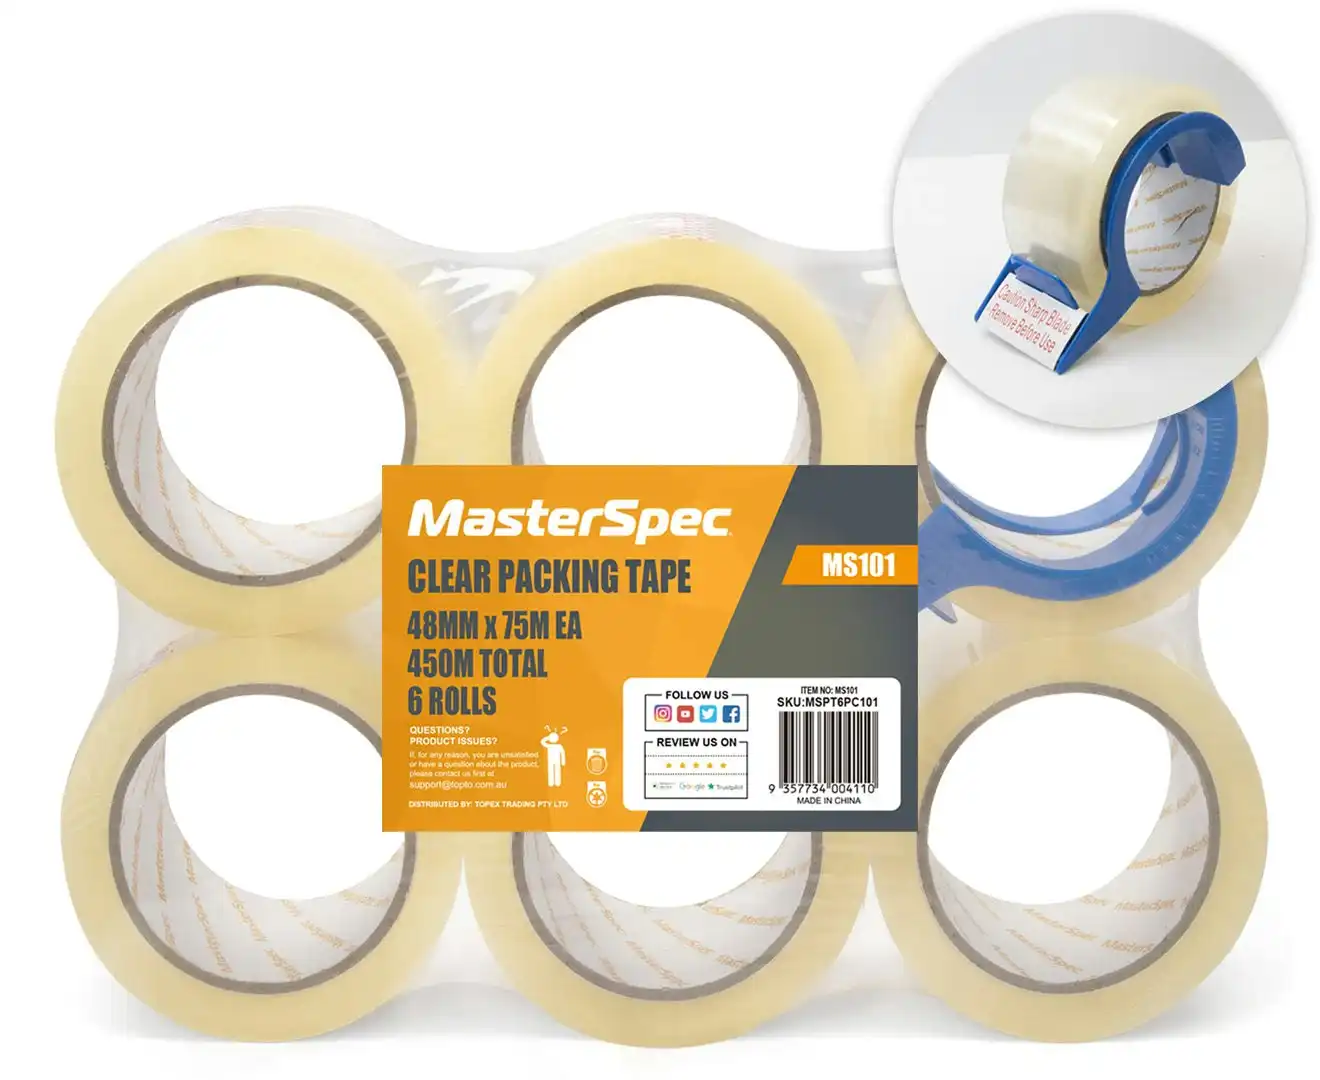 MasterSpec Clear Packing Tape - 6 Rolls, 450m Total Length, 48mm x 75m